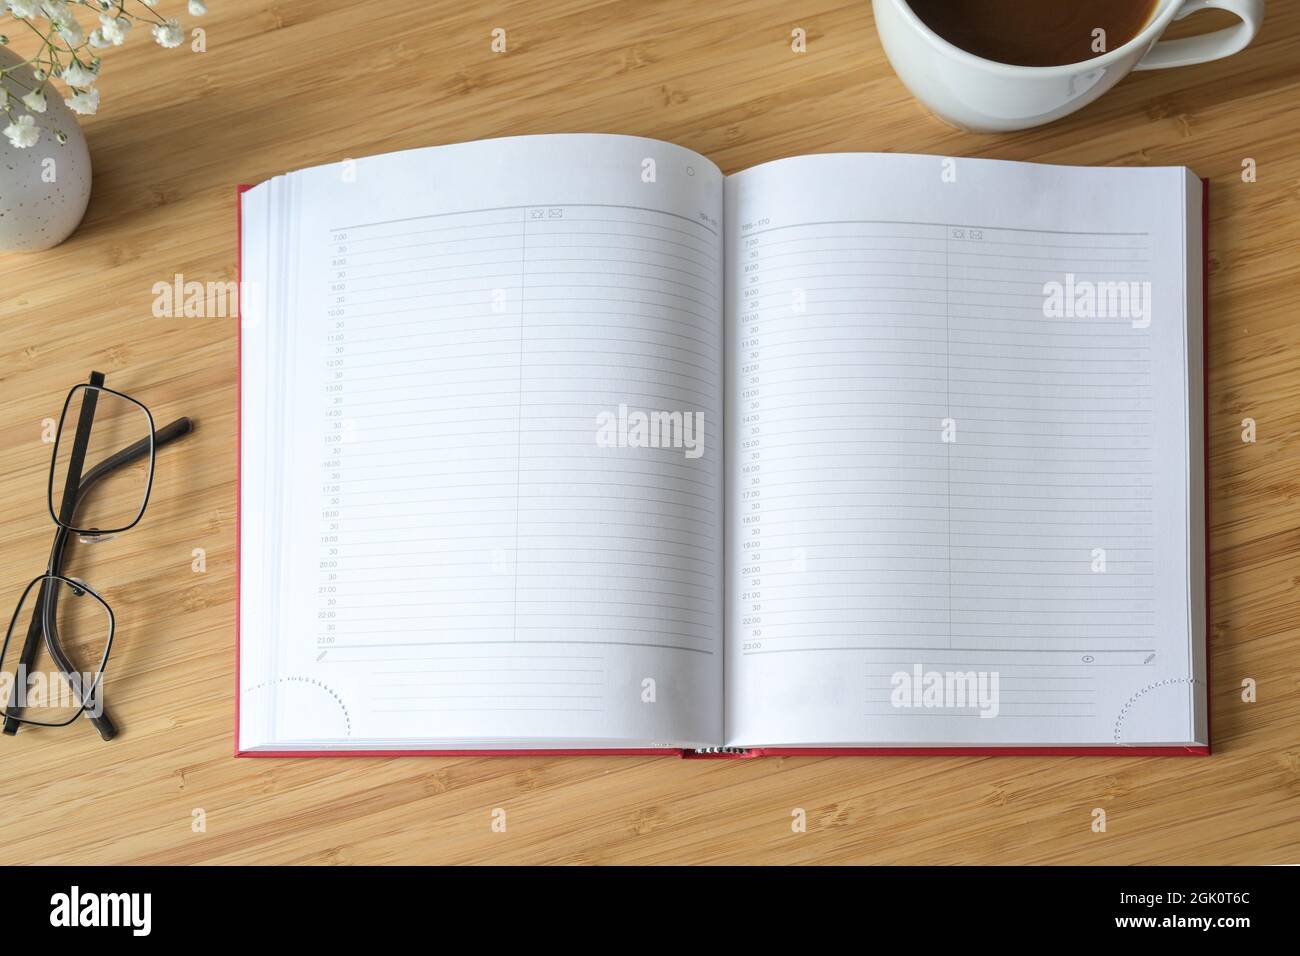 Flat lay mock-up of a blank open diary or appointment calendar on a wooden desk with coffee and glasses, time management concept, copy space, selected Stock Photo